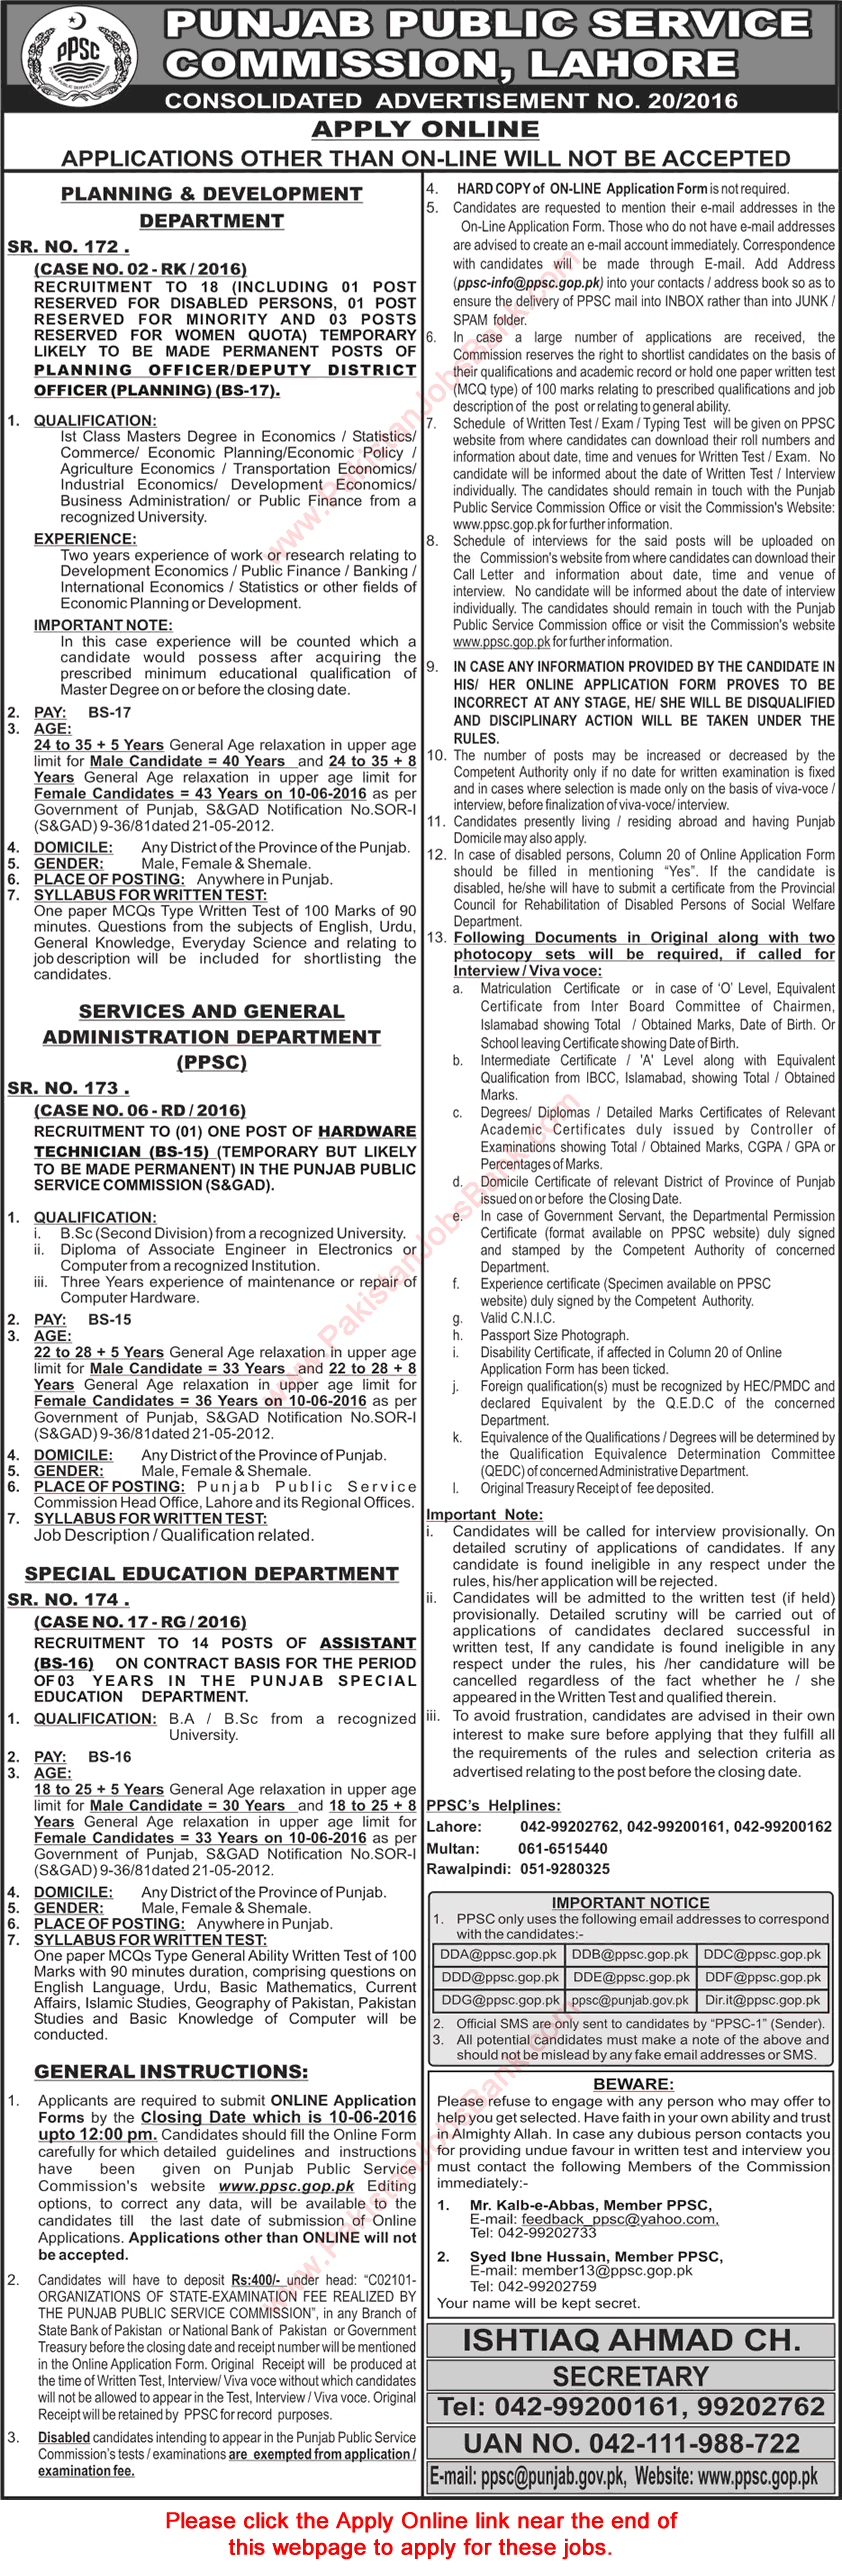 PPSC Jobs May 2016 Consolidated Advertisement No 20/2016 Apply Online Latest / New